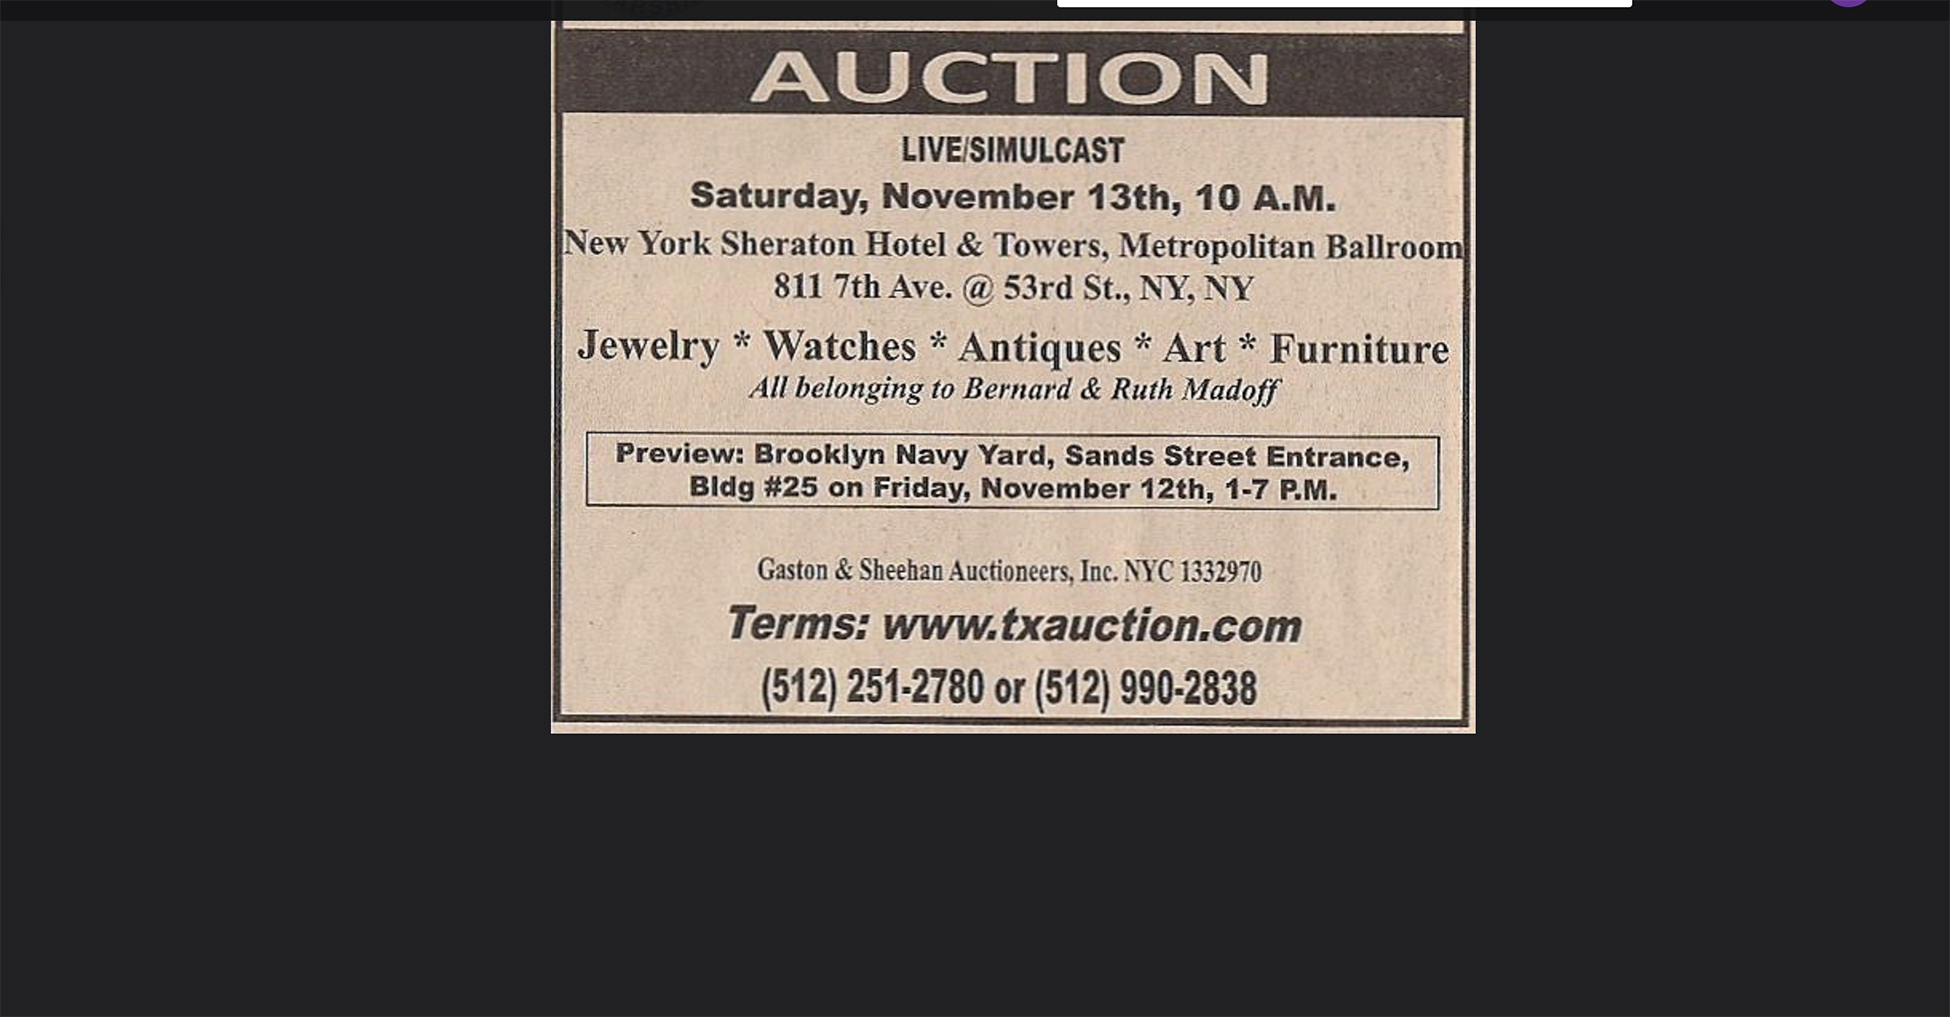 The posting reads as follows. Auction. Live, simulcast. Saturday, November 13th 10 a m. New York Sheraton hotel and towers, metropolitan ballroom. Jewelry, watches, antiques, art, furniture, all belonging to Bernard and Ruth Madoff. Terms, wwwdottxauctiondotcom.